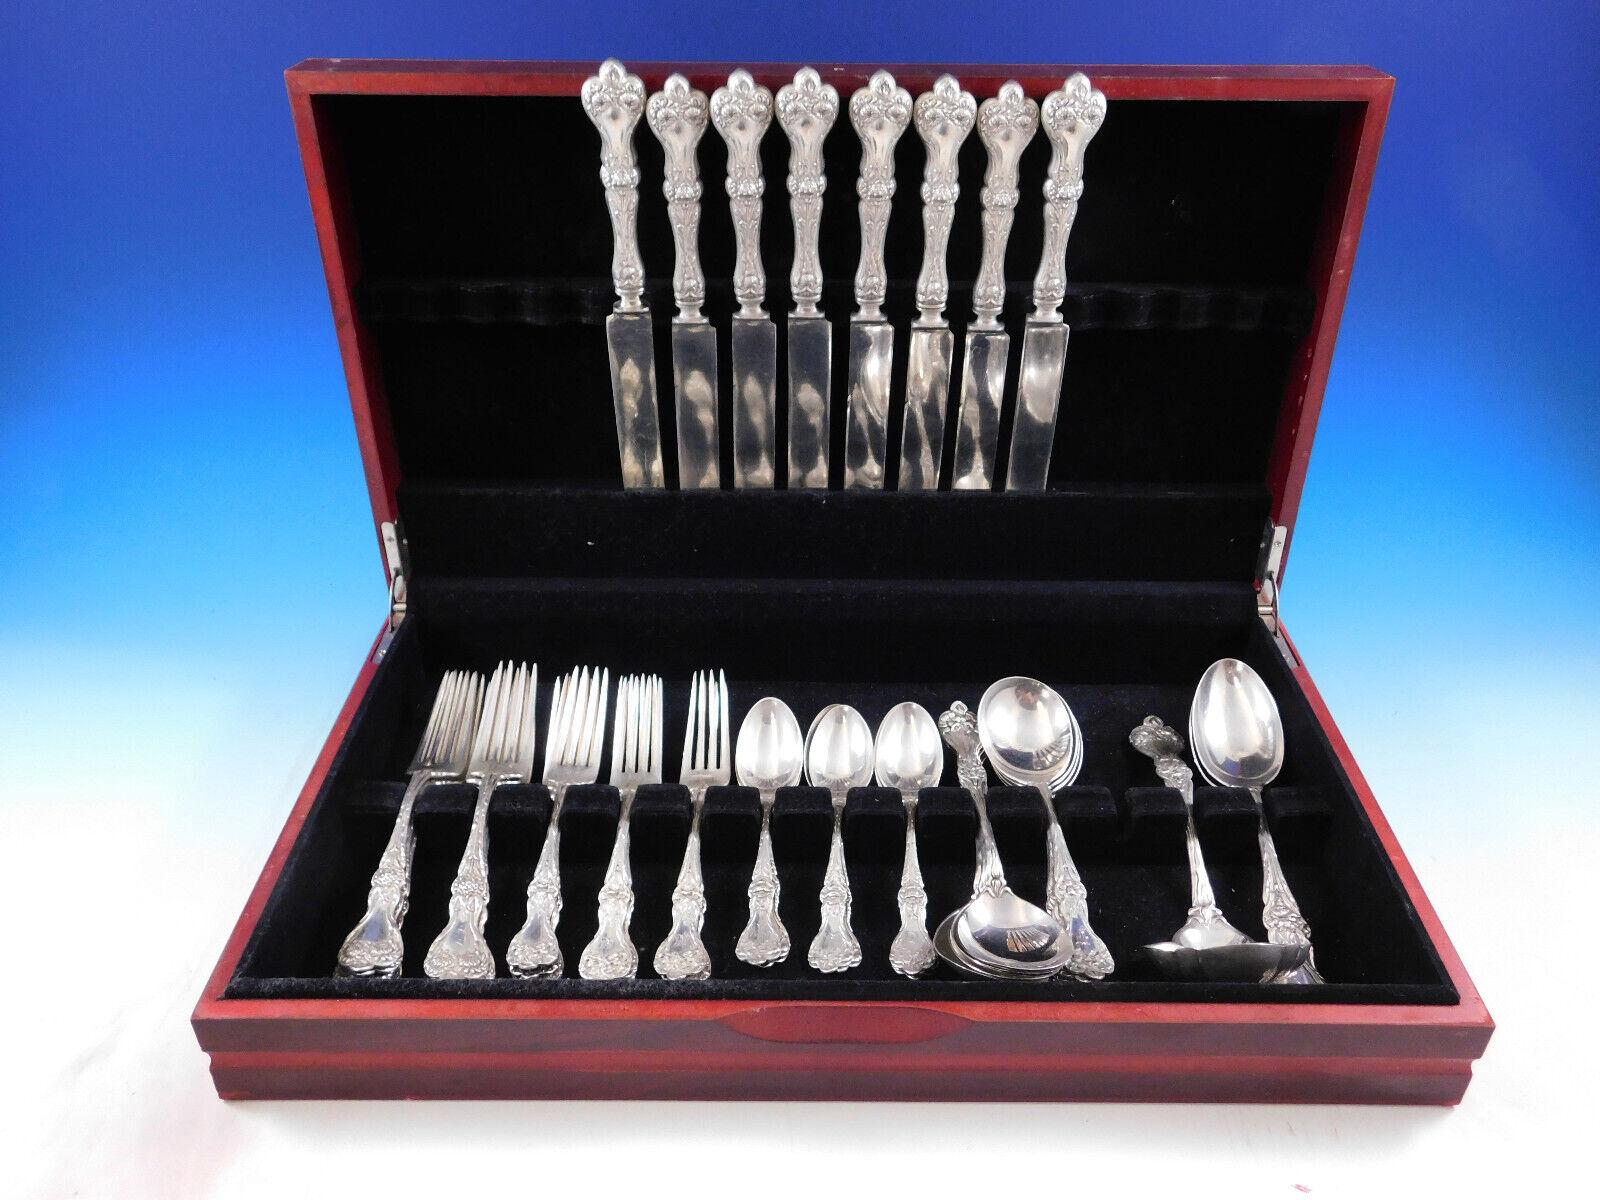 Gorgeous Dinner Size Majestic by Alvin sterling Silver flatware set - 43 pieces. This set includes:

8 Dinner Size Knives, 9 5/8